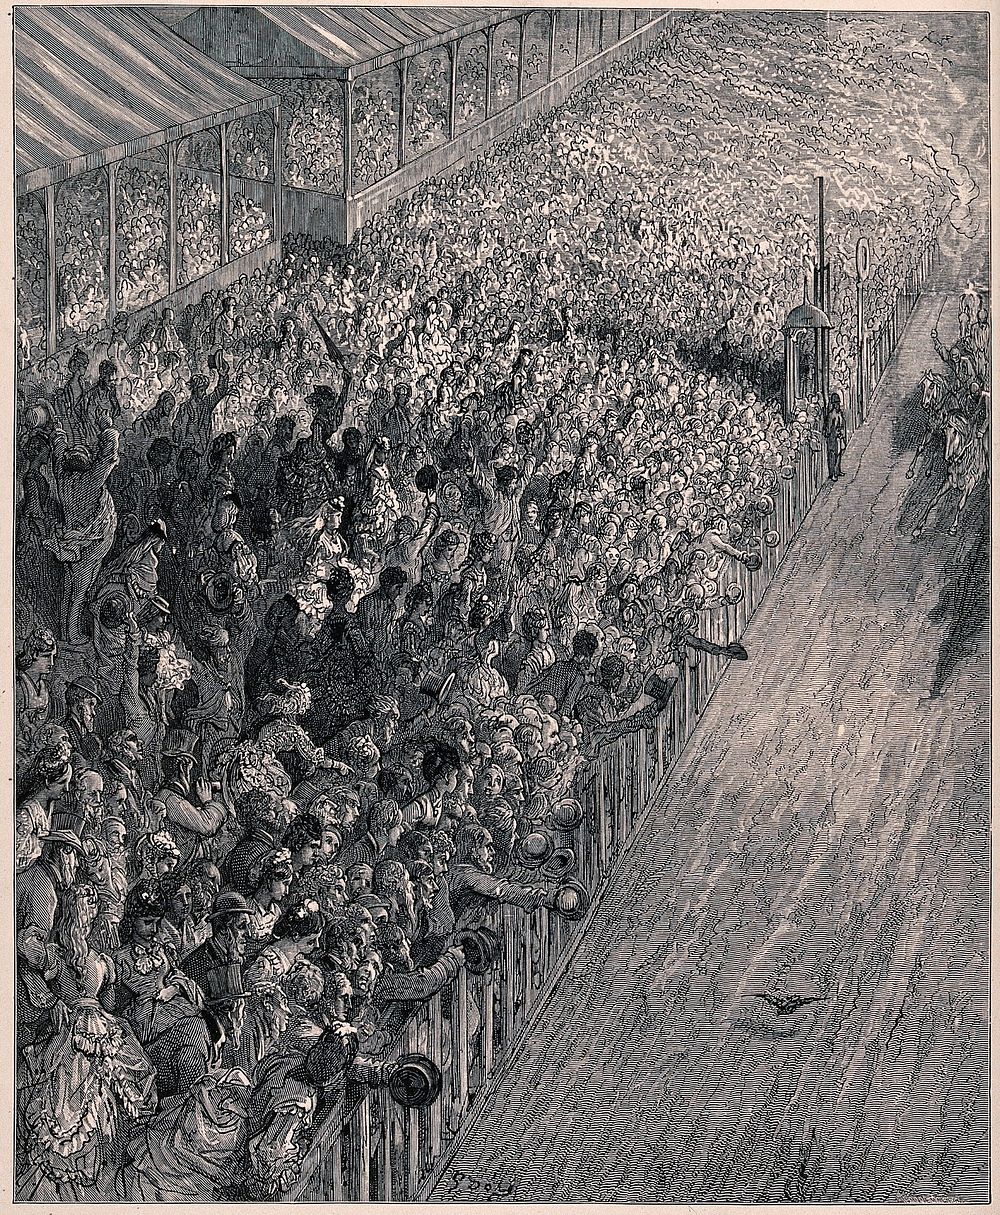 Crowds watching horses approach the finishing line of the Derby. Wood engraving by A.F. Pannemaker after G. Doré.